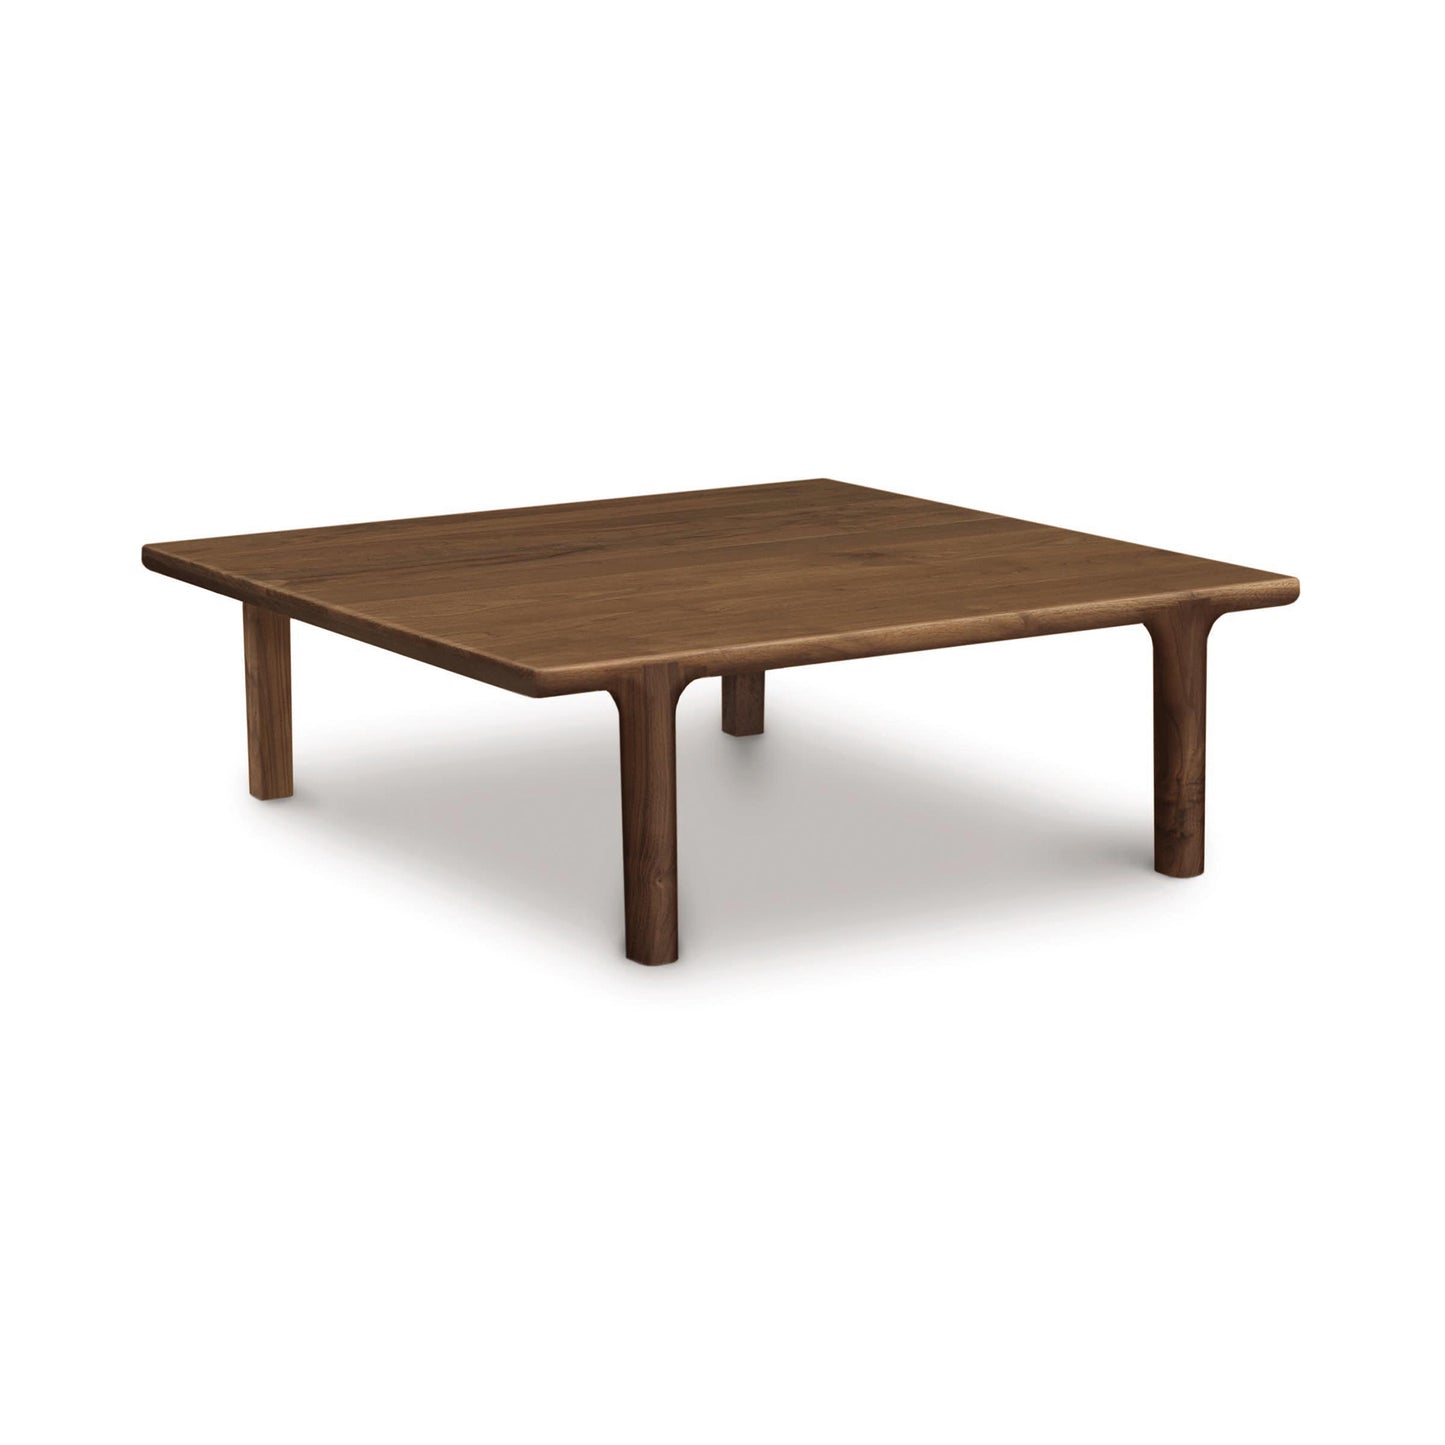 Sentence with replaced product:
A low-profile, Copeland Furniture Sierra Square Coffee Table crafted from North American hardwood, with simple tapered legs, isolated on a white background.